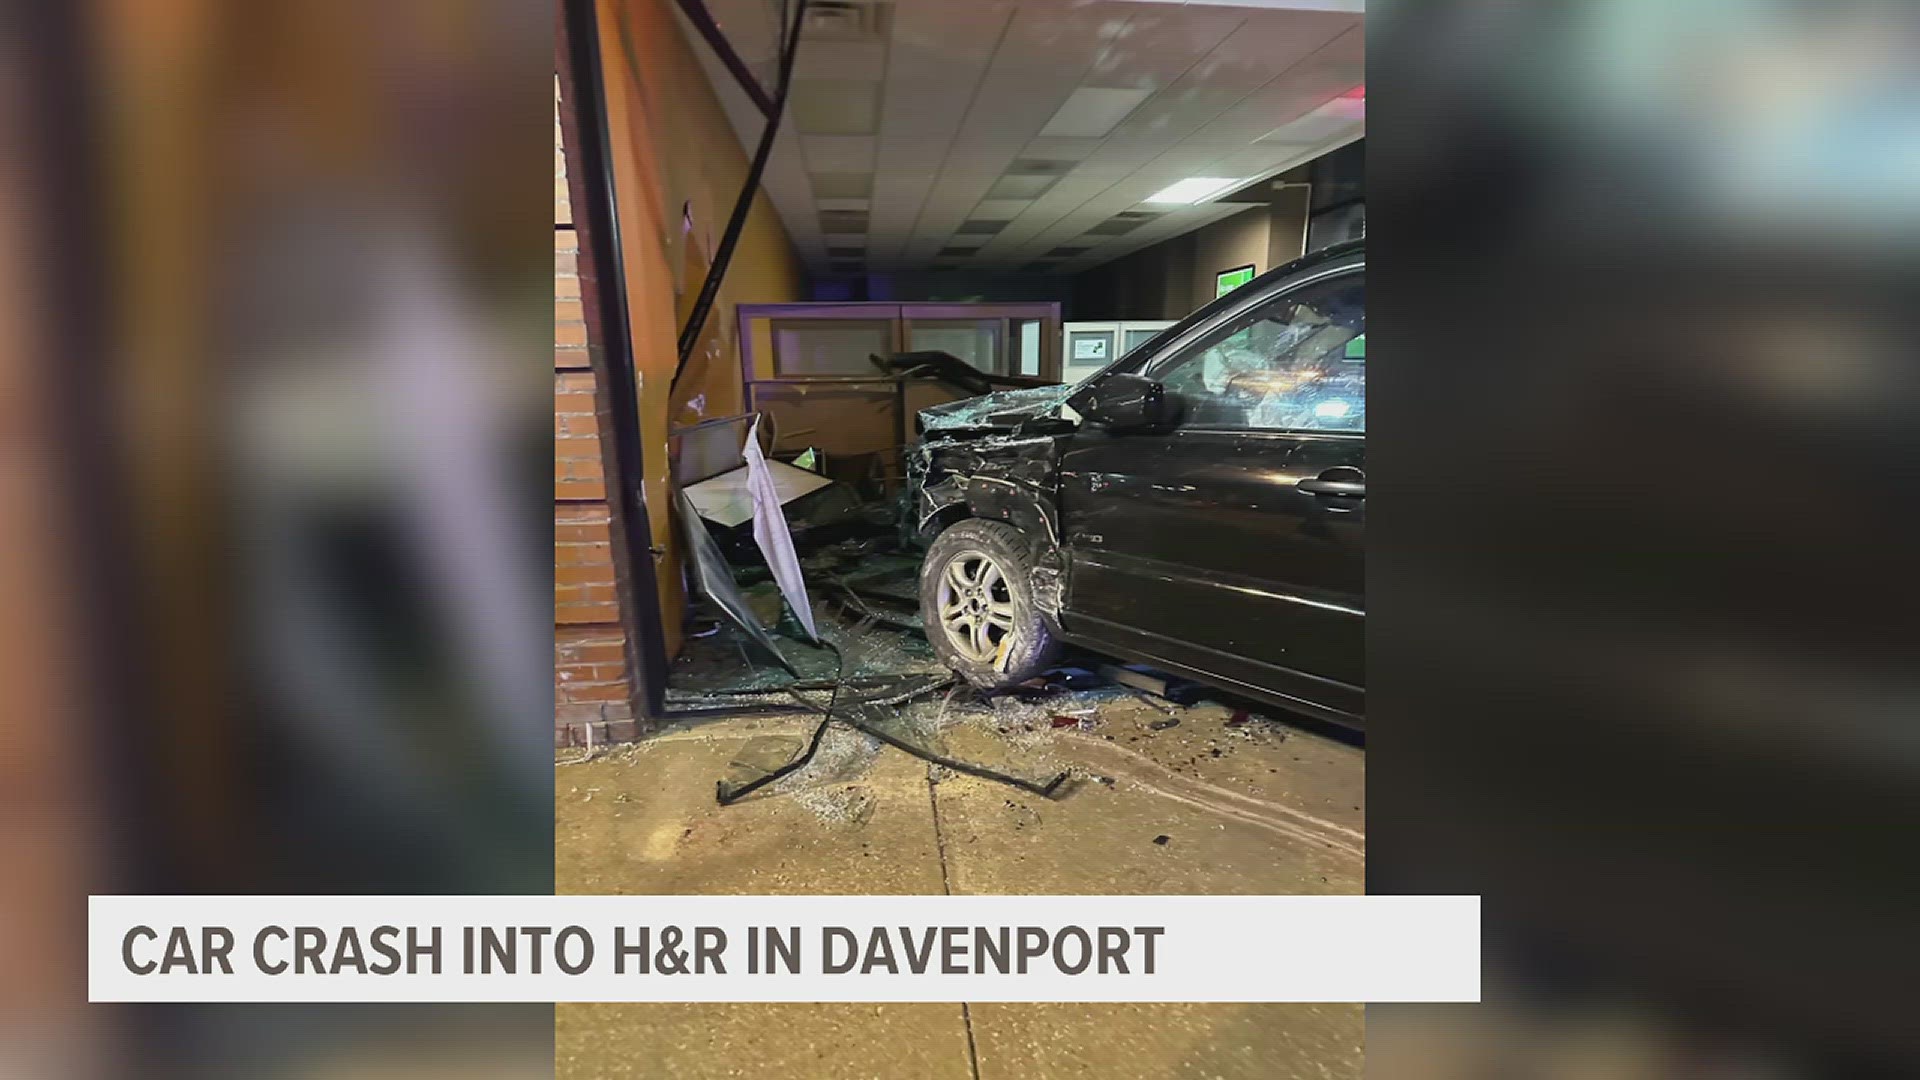 The building manager told News 8 that the driver ran a red light, hit a car and then went through the business' front window.